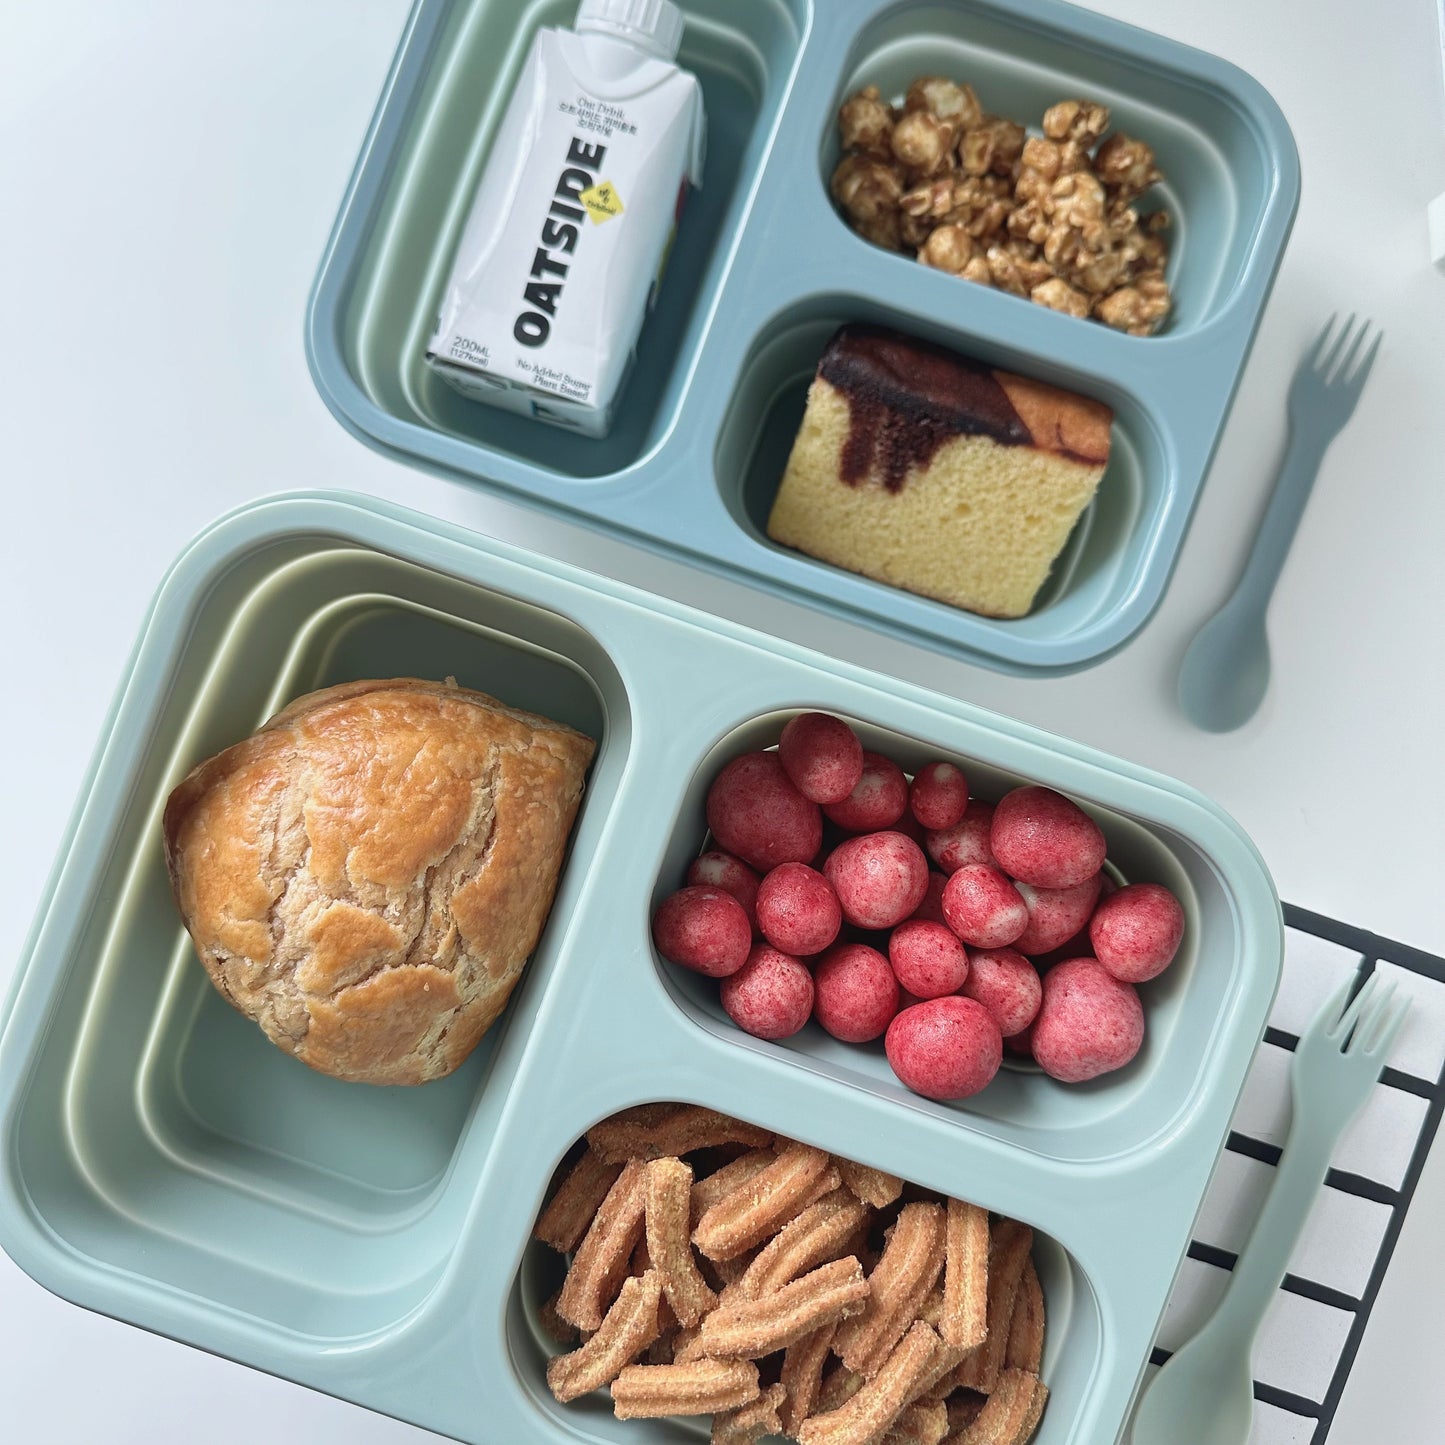 [Eco-Lyfe] Collapsible Lunchbox 3.0